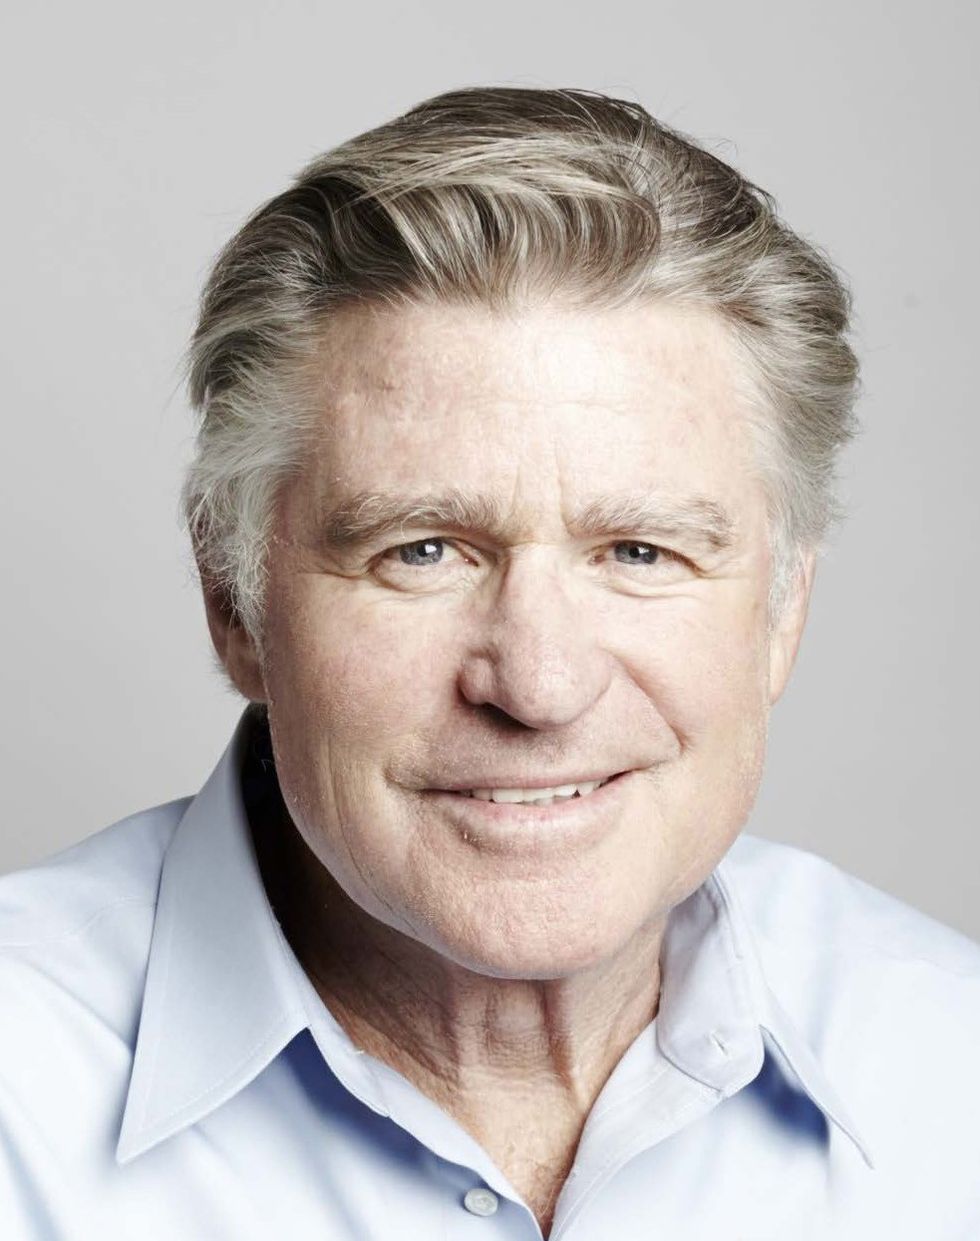 A Sneak Peek at a New Play by Treat Williams About U.S. Grant